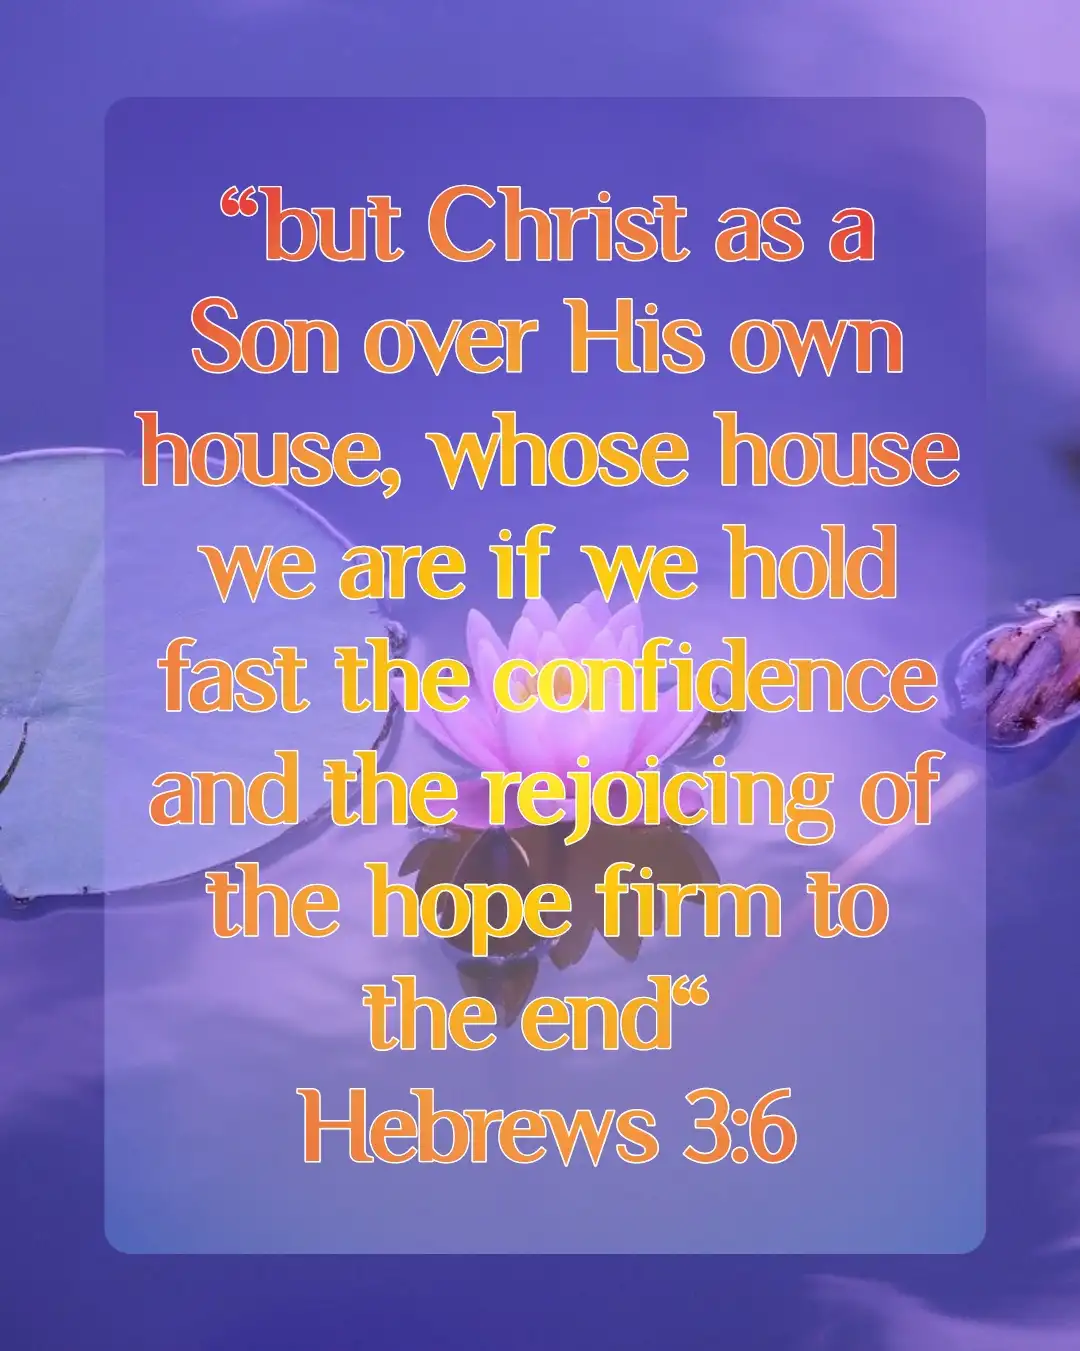 bible verses on faith and hope (Hebrews 3:6)